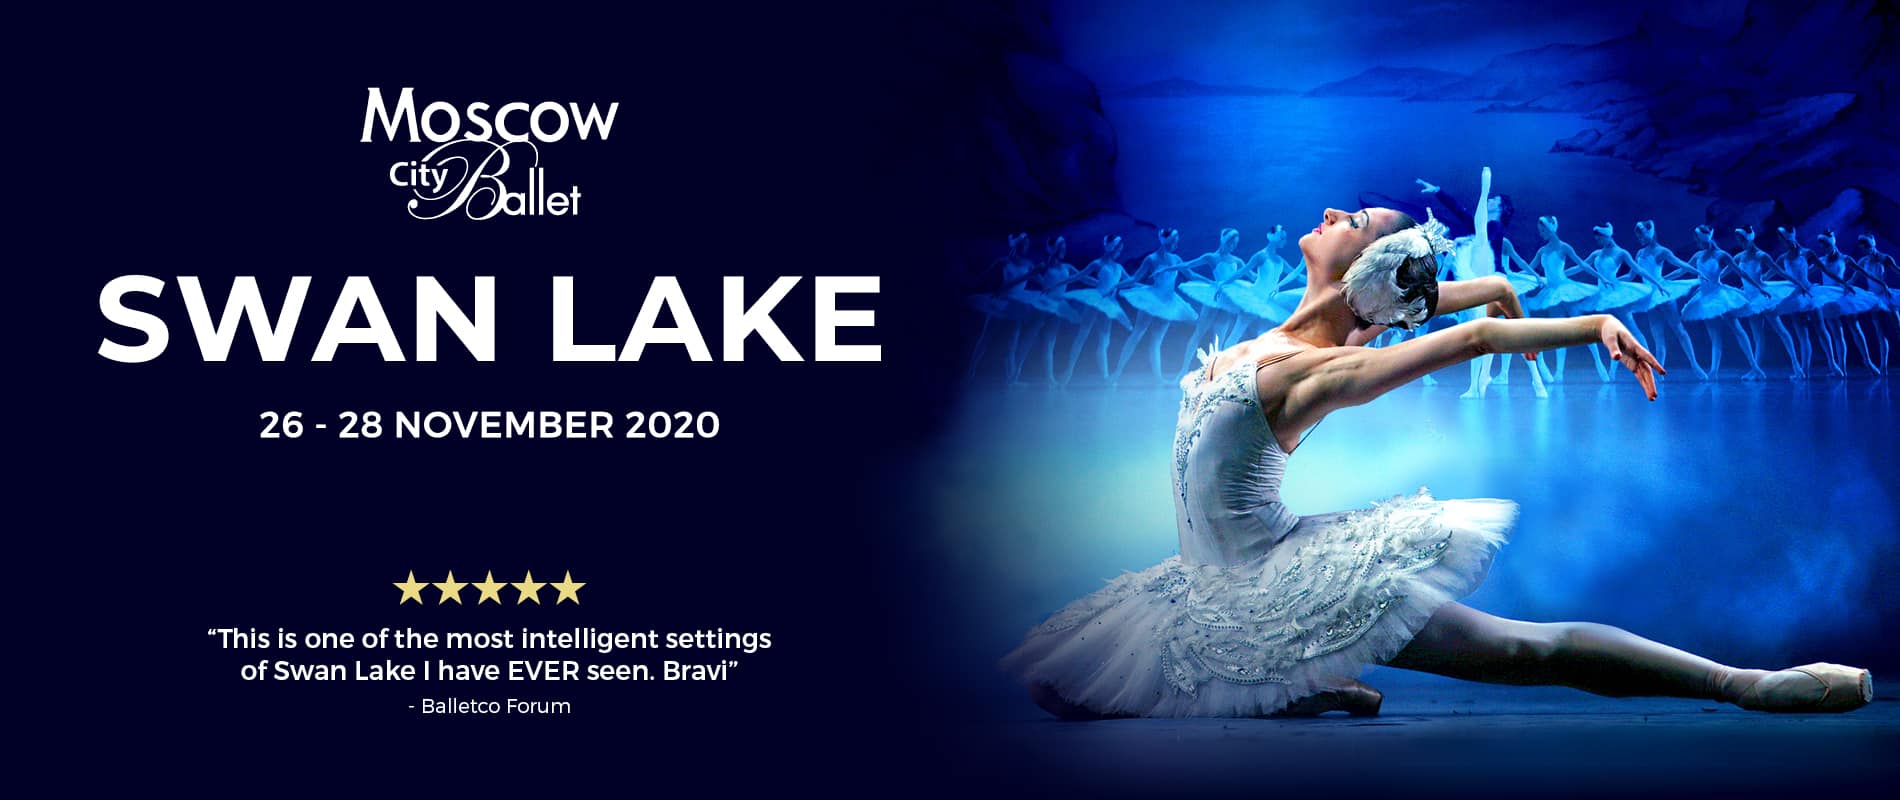 Swan Lake by Moscow City Ballet - Coming Soon in UAE